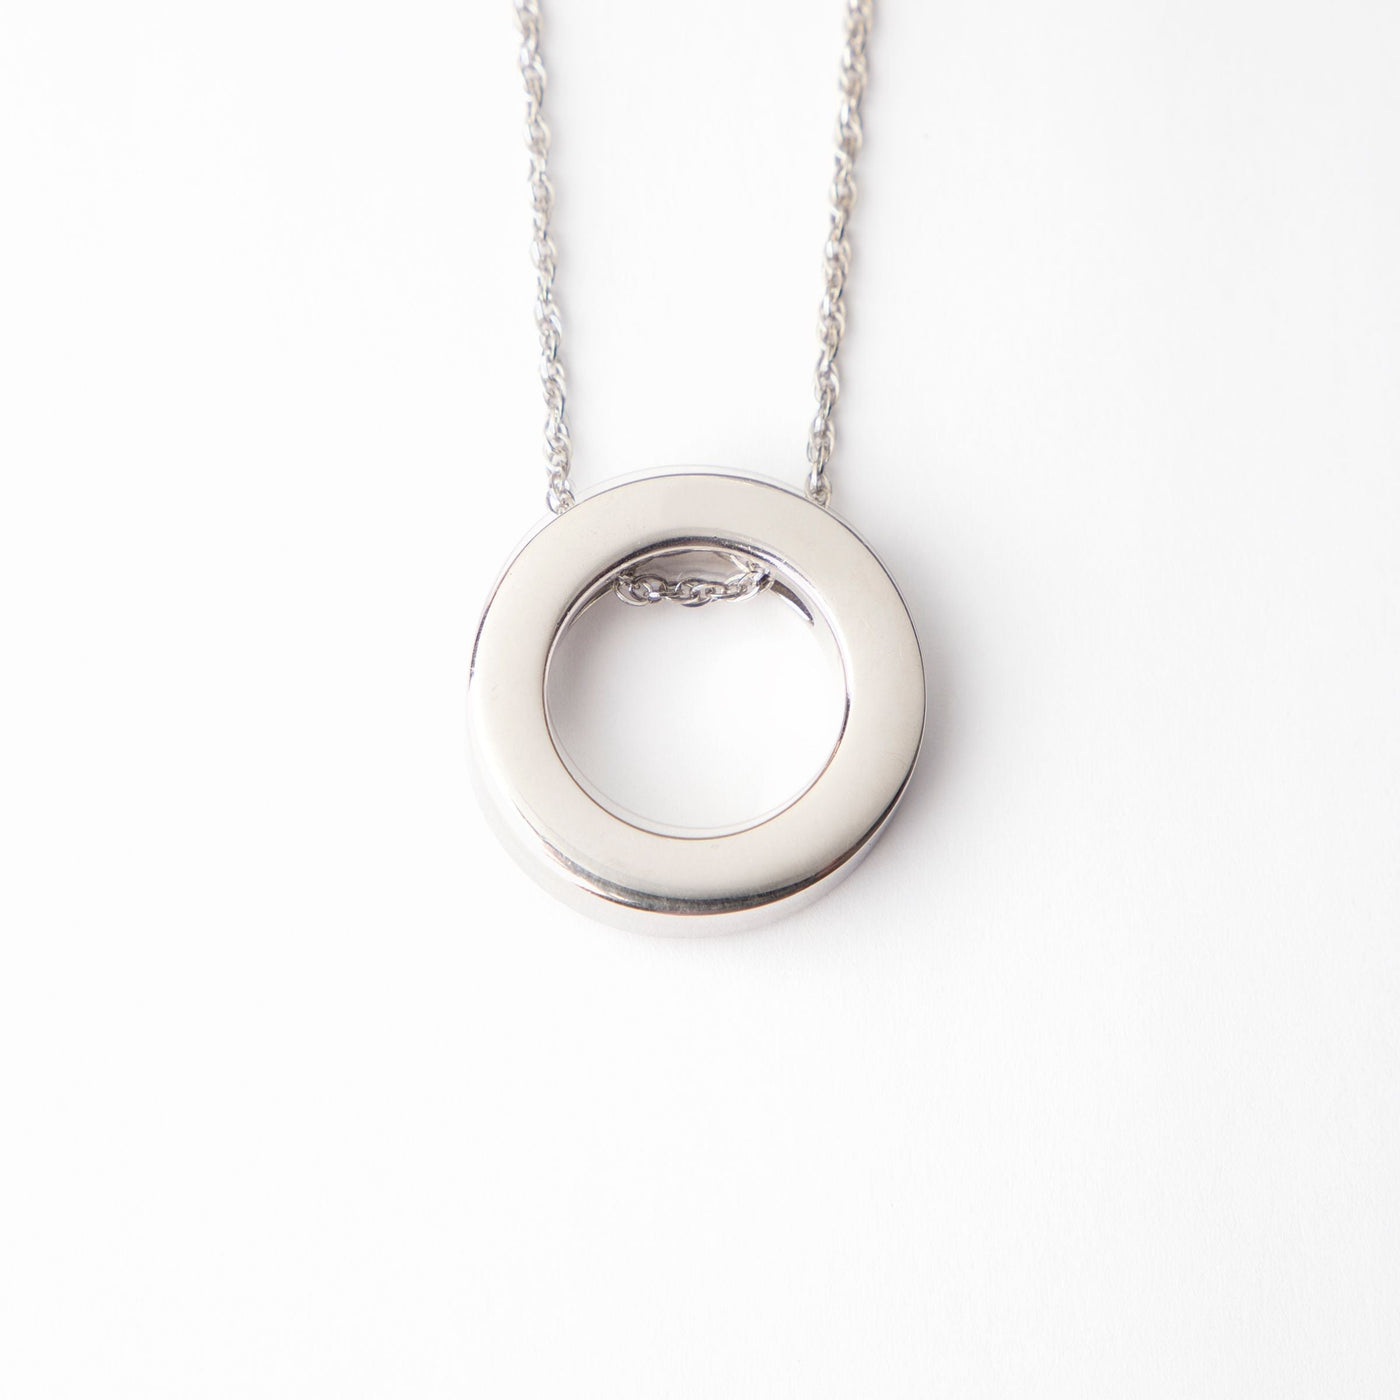 Circle of Life Cremation Pendant - Two Rivers